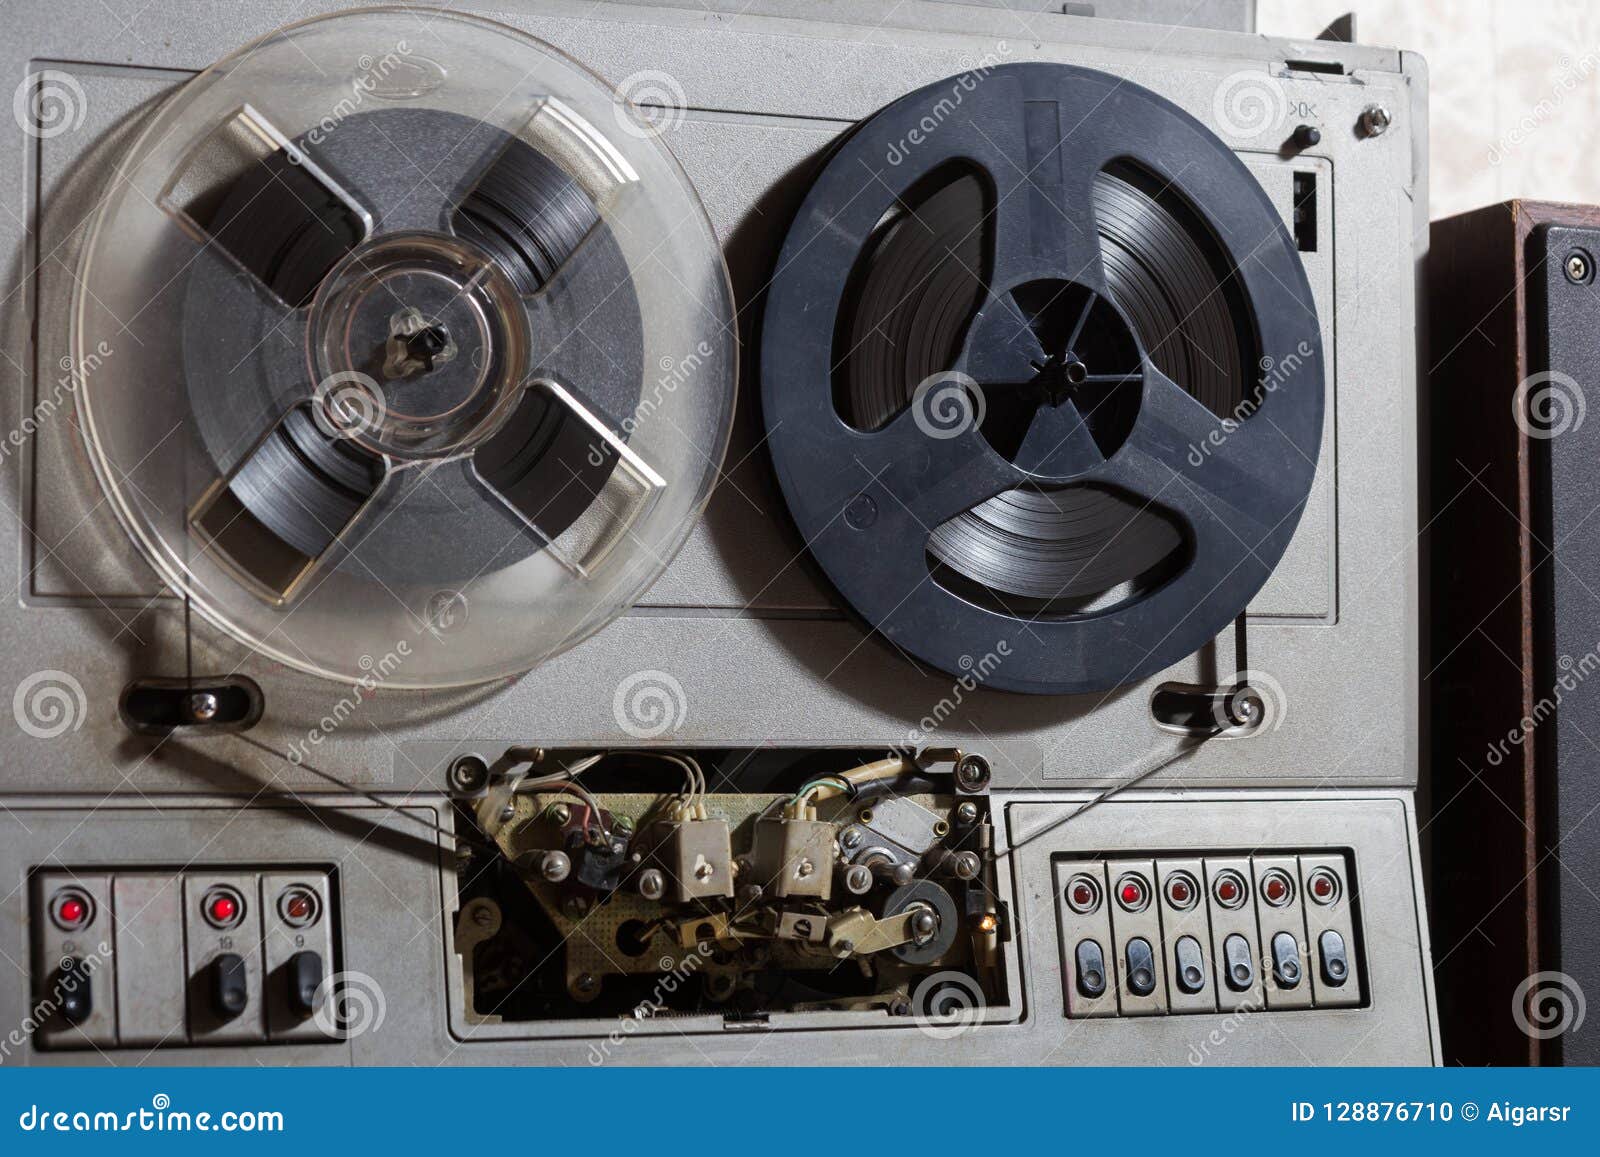 Reel to reel player stock photo. Image of magnetic, listen - 128876710